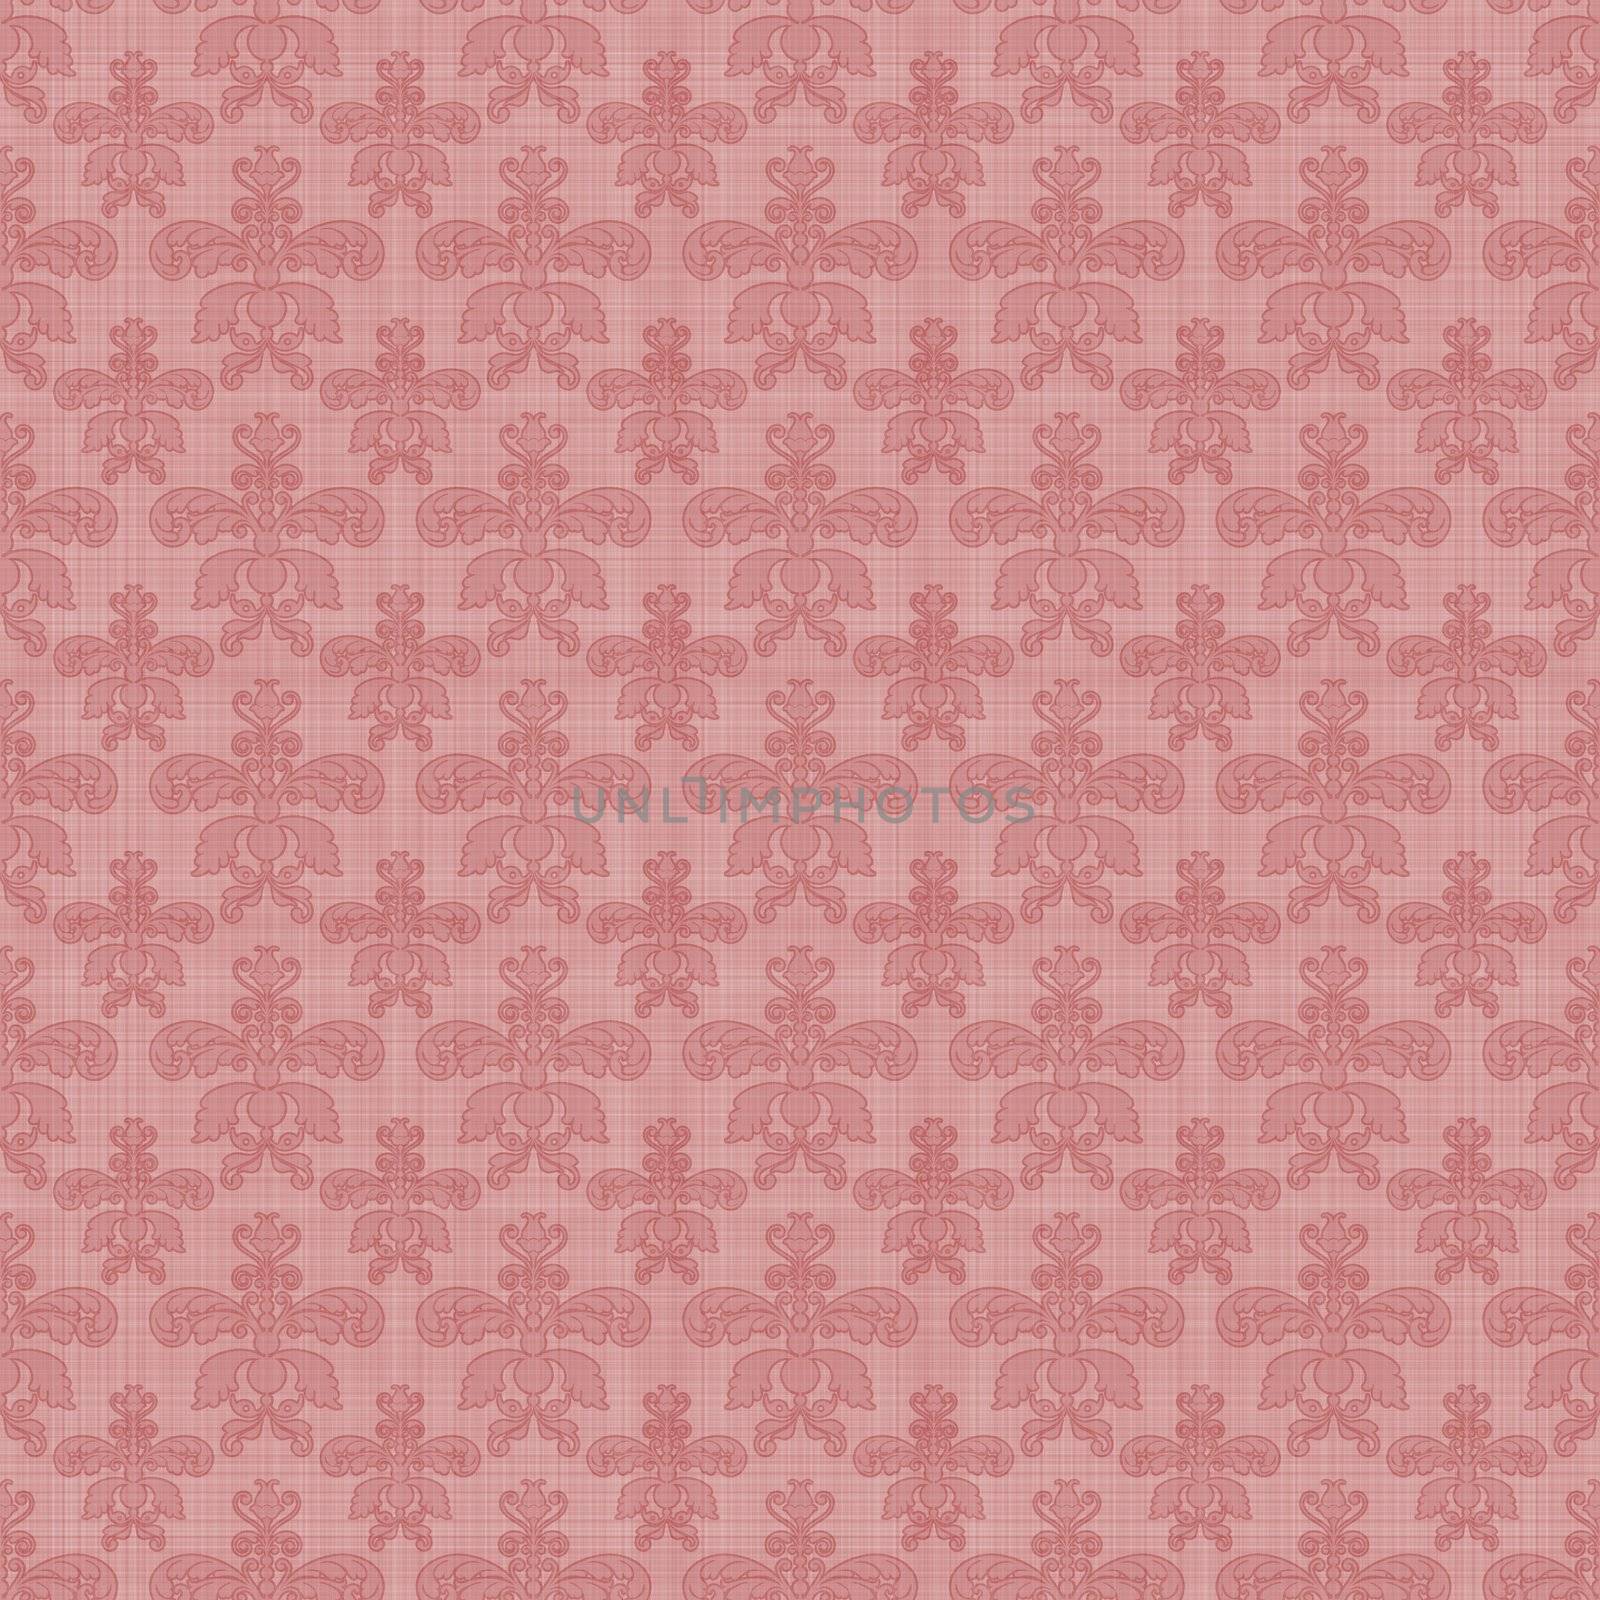 Slightly grungy feel to soft pink damask fabric. Tiles seamlessly.